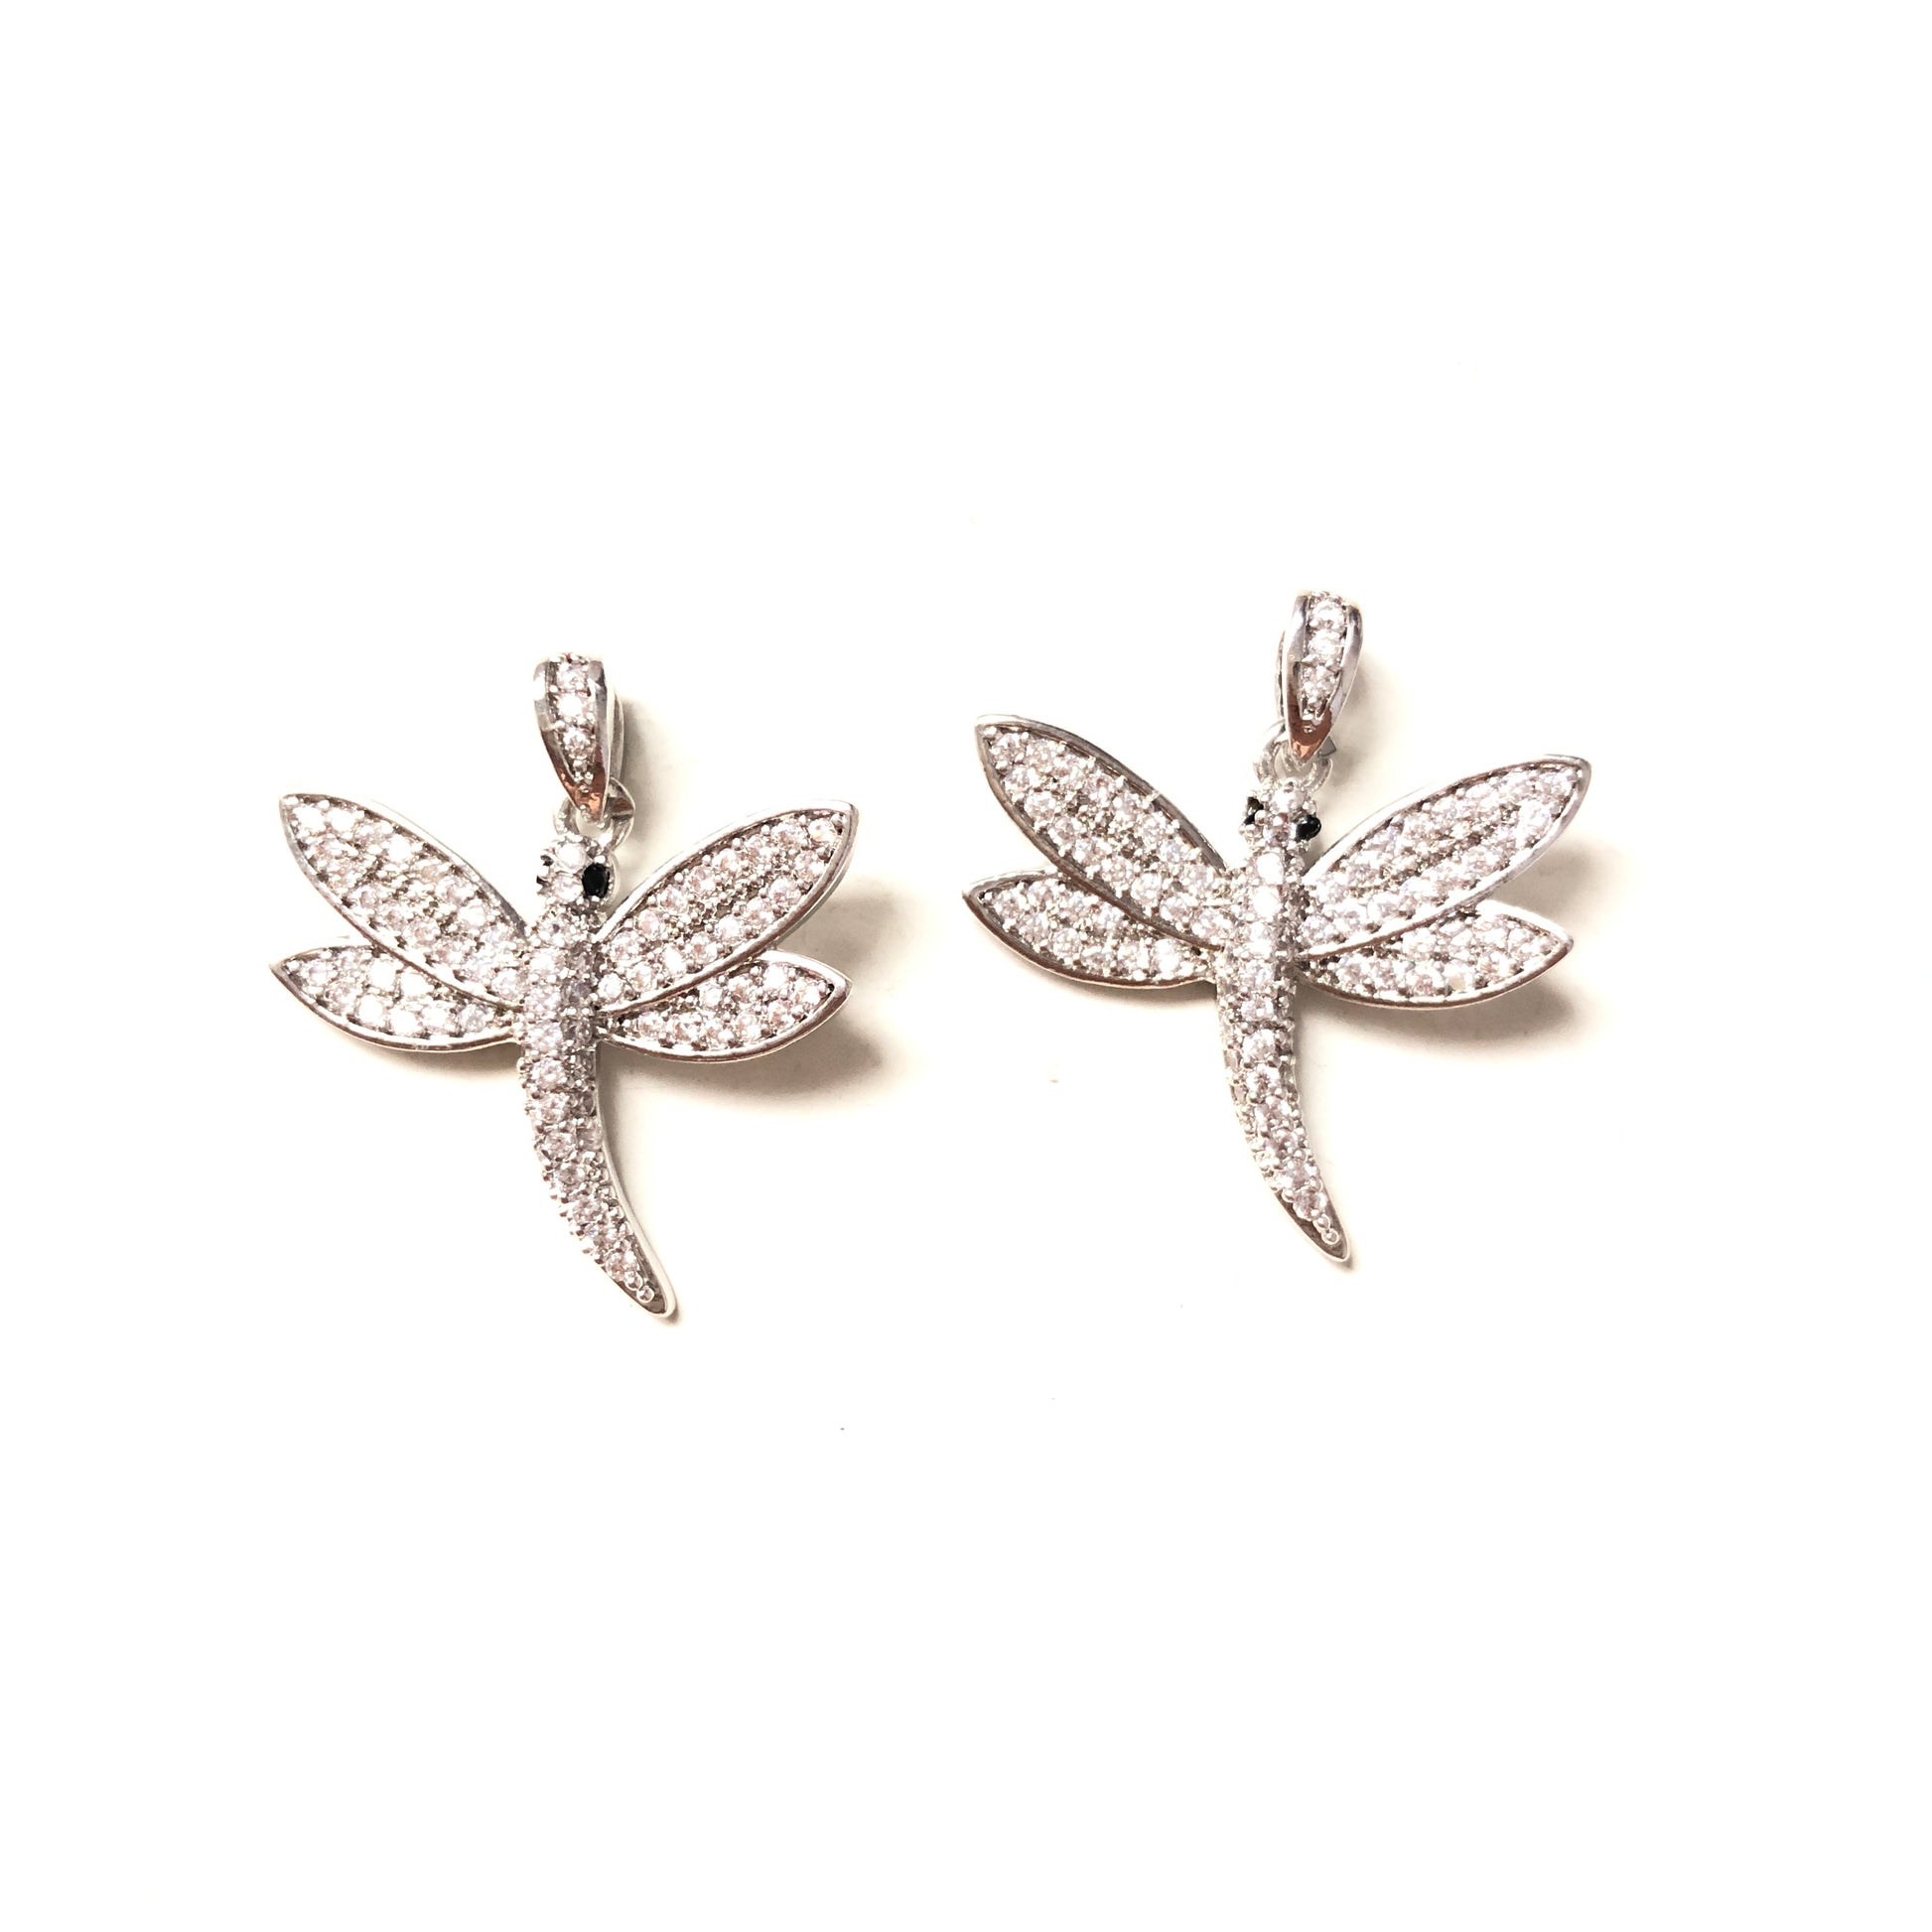 10pcs/lot 23.5*21.5mm CZ Paved Dragonfly Charms Silver CZ Paved Charms Animals & Insects Charms Beads Beyond